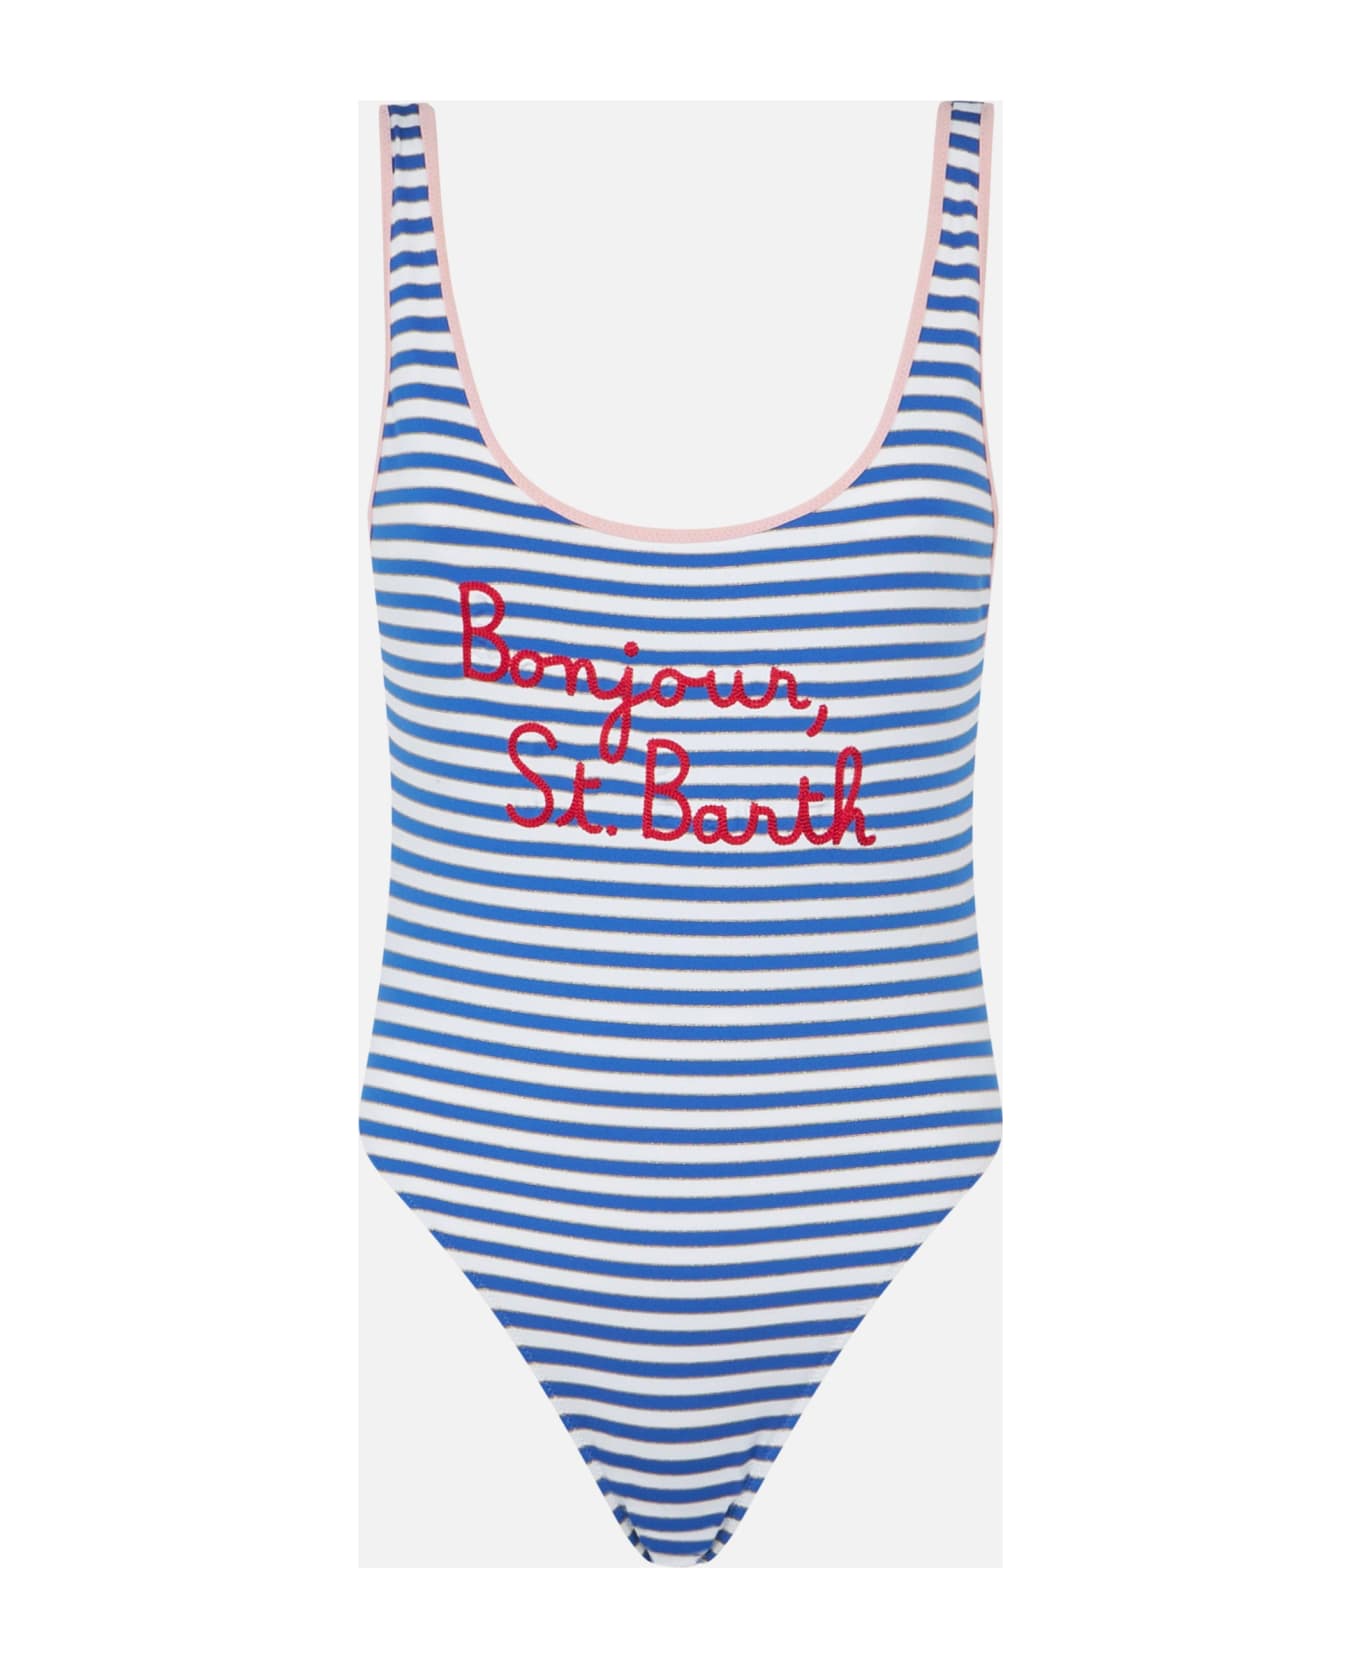 MC2 Saint Barth Woman Striped One Piece Swimsuit With Bonjour St. Barth Embroidery - BLUE